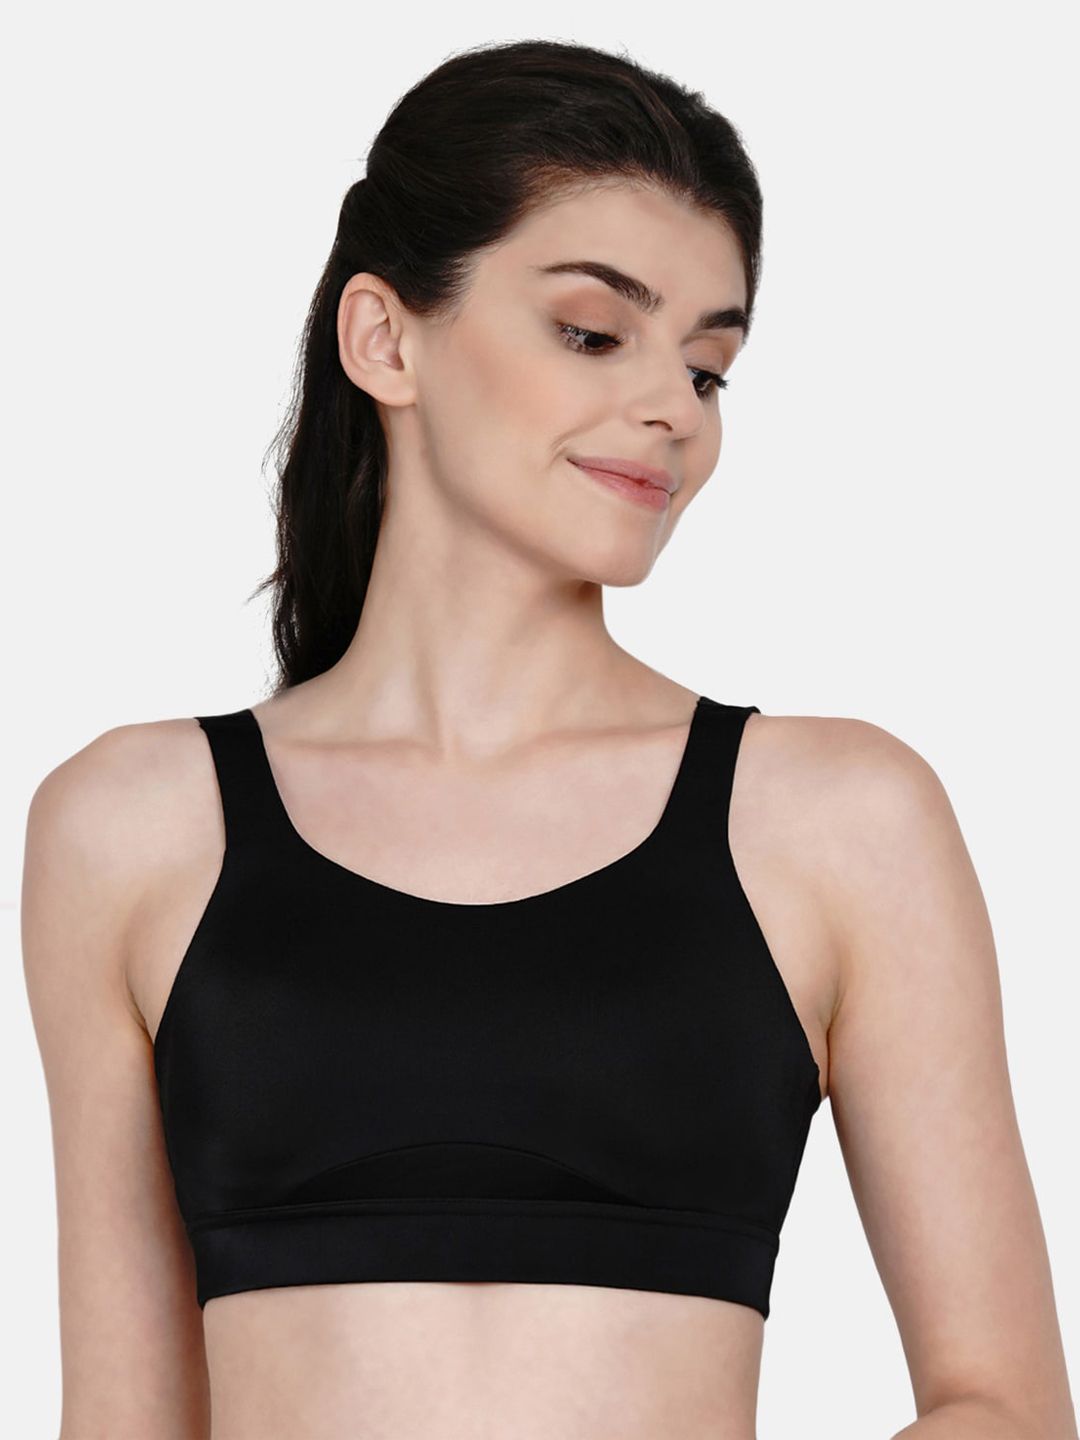 Enamor Black Solid Non-Wired Lightly Padded Sports Bra SB18 Price in India